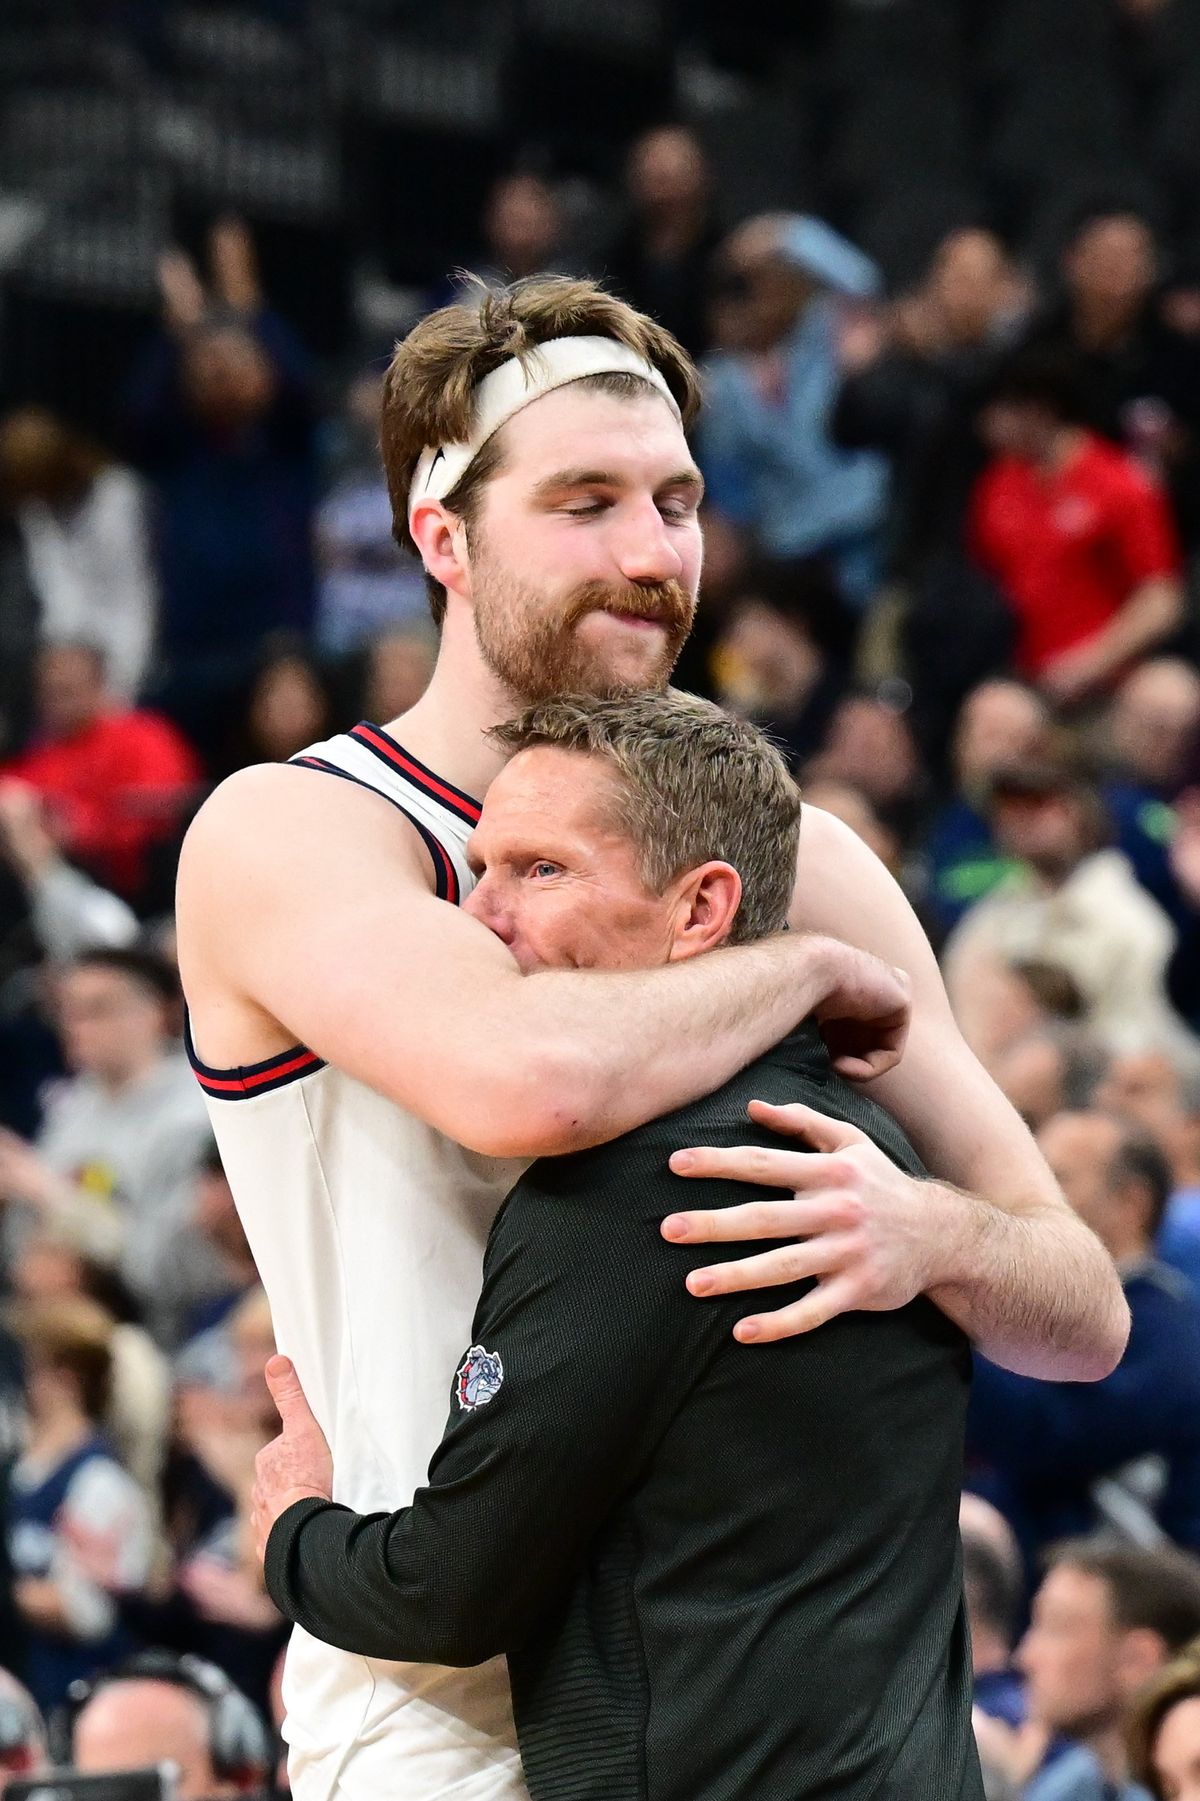 Gonzaga Bulldogs forward Drew Timme embraces head coach Mark Few after being taken out of the game late during a runaway loss in an NCAA Tournament Elite 8 basketball game against UConn on March 2 at T-Mobile Arena in Las Vegas. UConn held Timme to 12 points and won the game 82-54.  (Tyler Tjomsland/The Spokesman-Review)